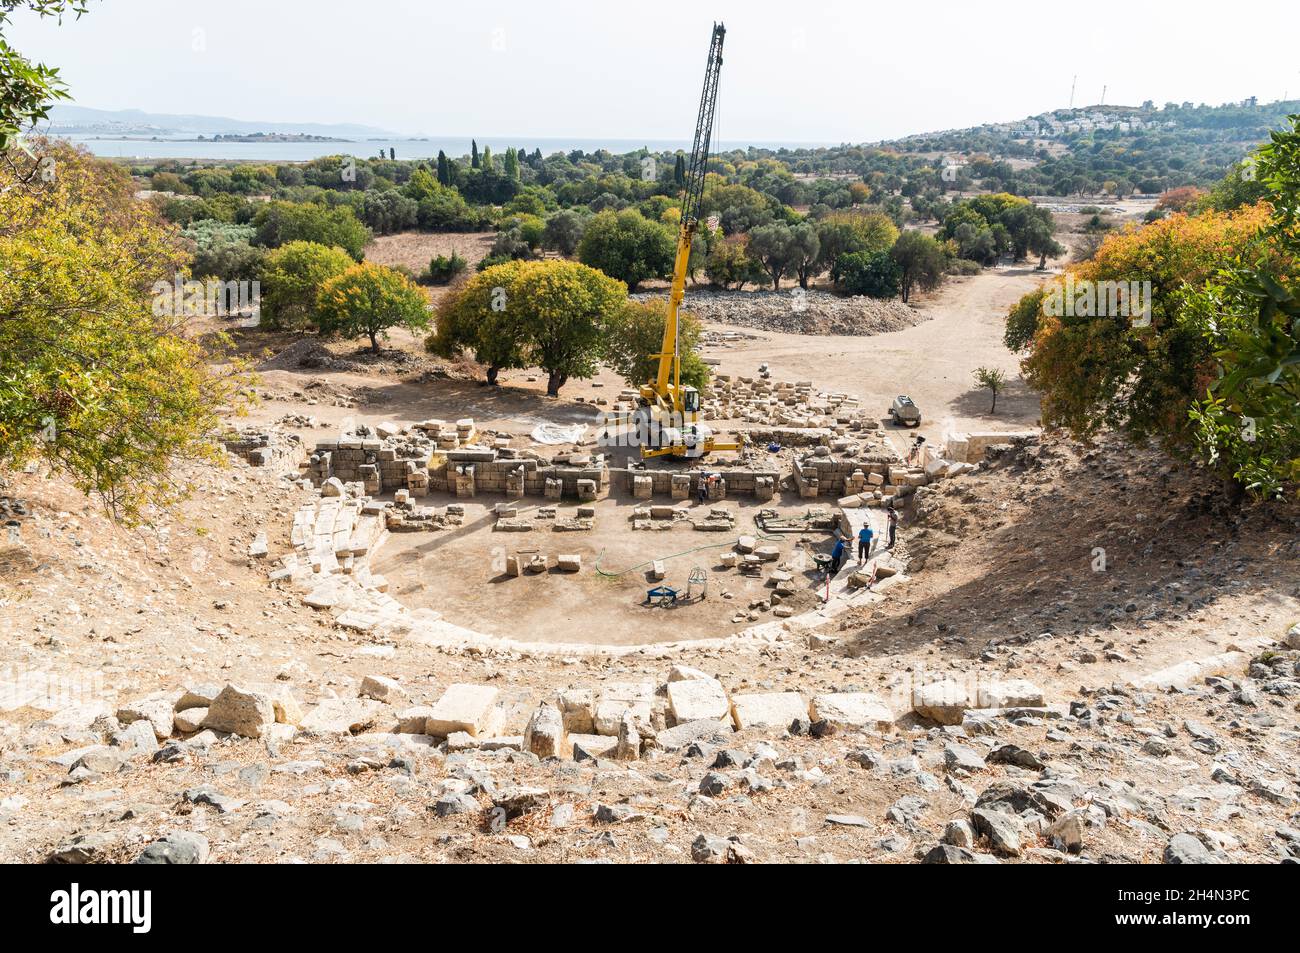 Teos, Izmir, Turkey – October 5, 2020. Excavation works going on at the ruined amphitheatre of ancient Greek city Teos in Izmir province of Turkey. Te Stock Photo